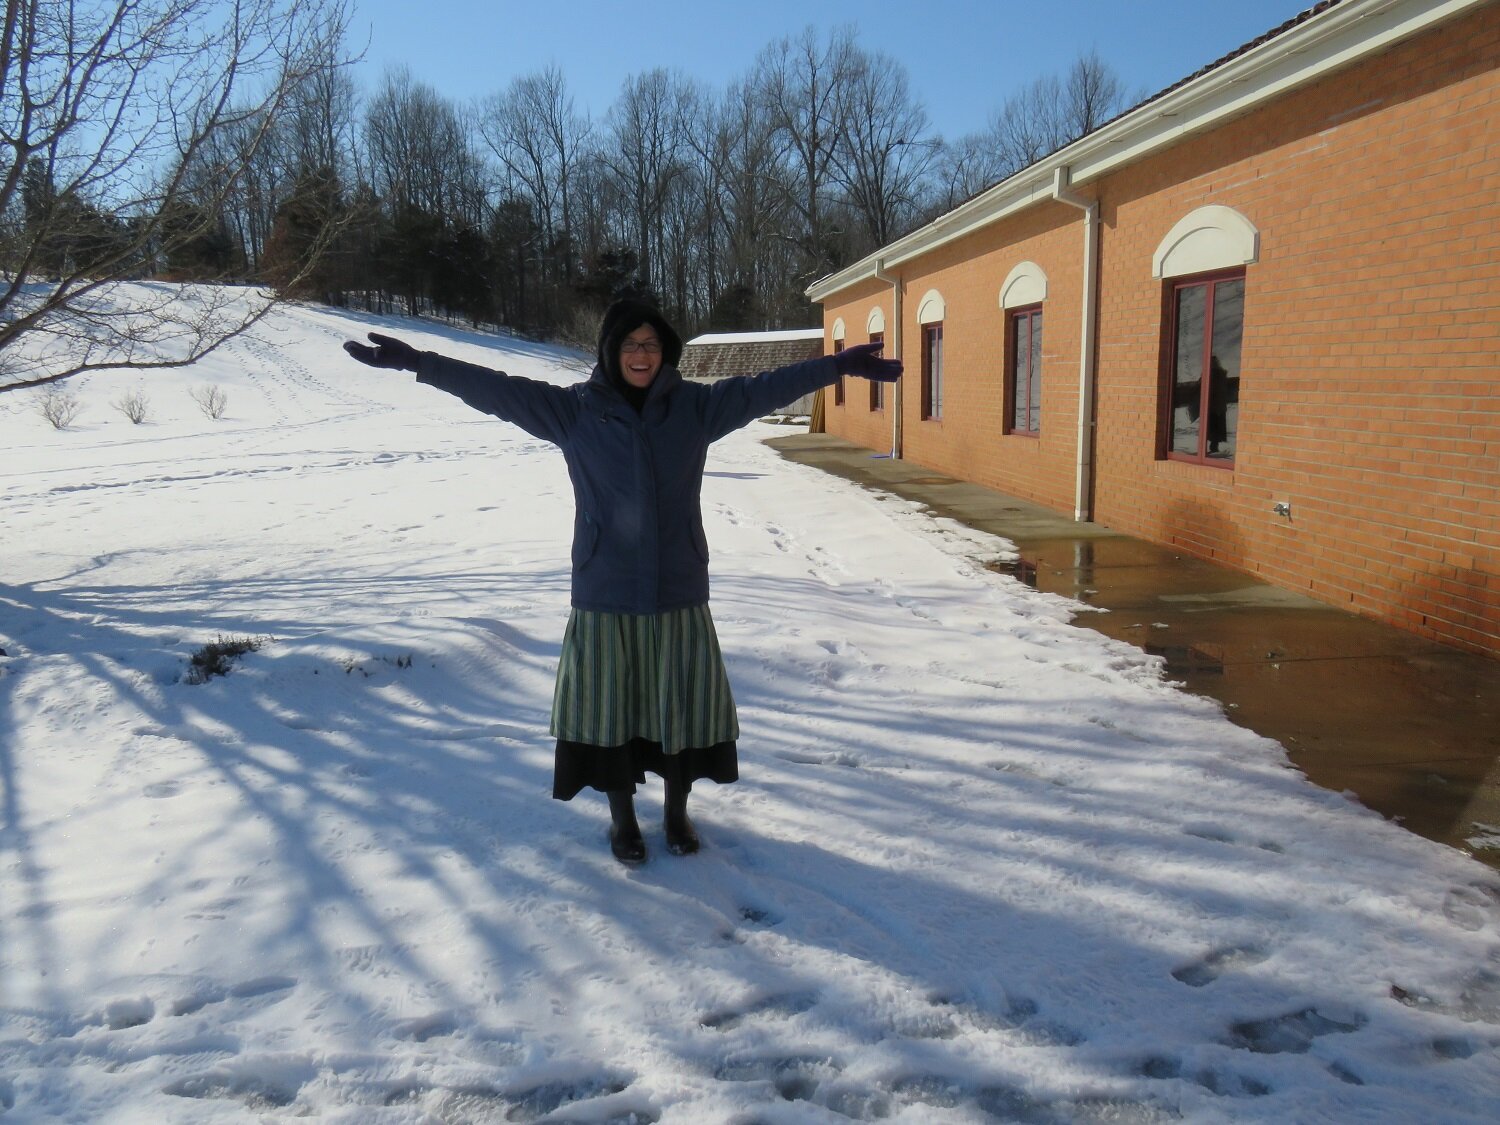  Sr. Maria Faustina is excited for a snow day! 